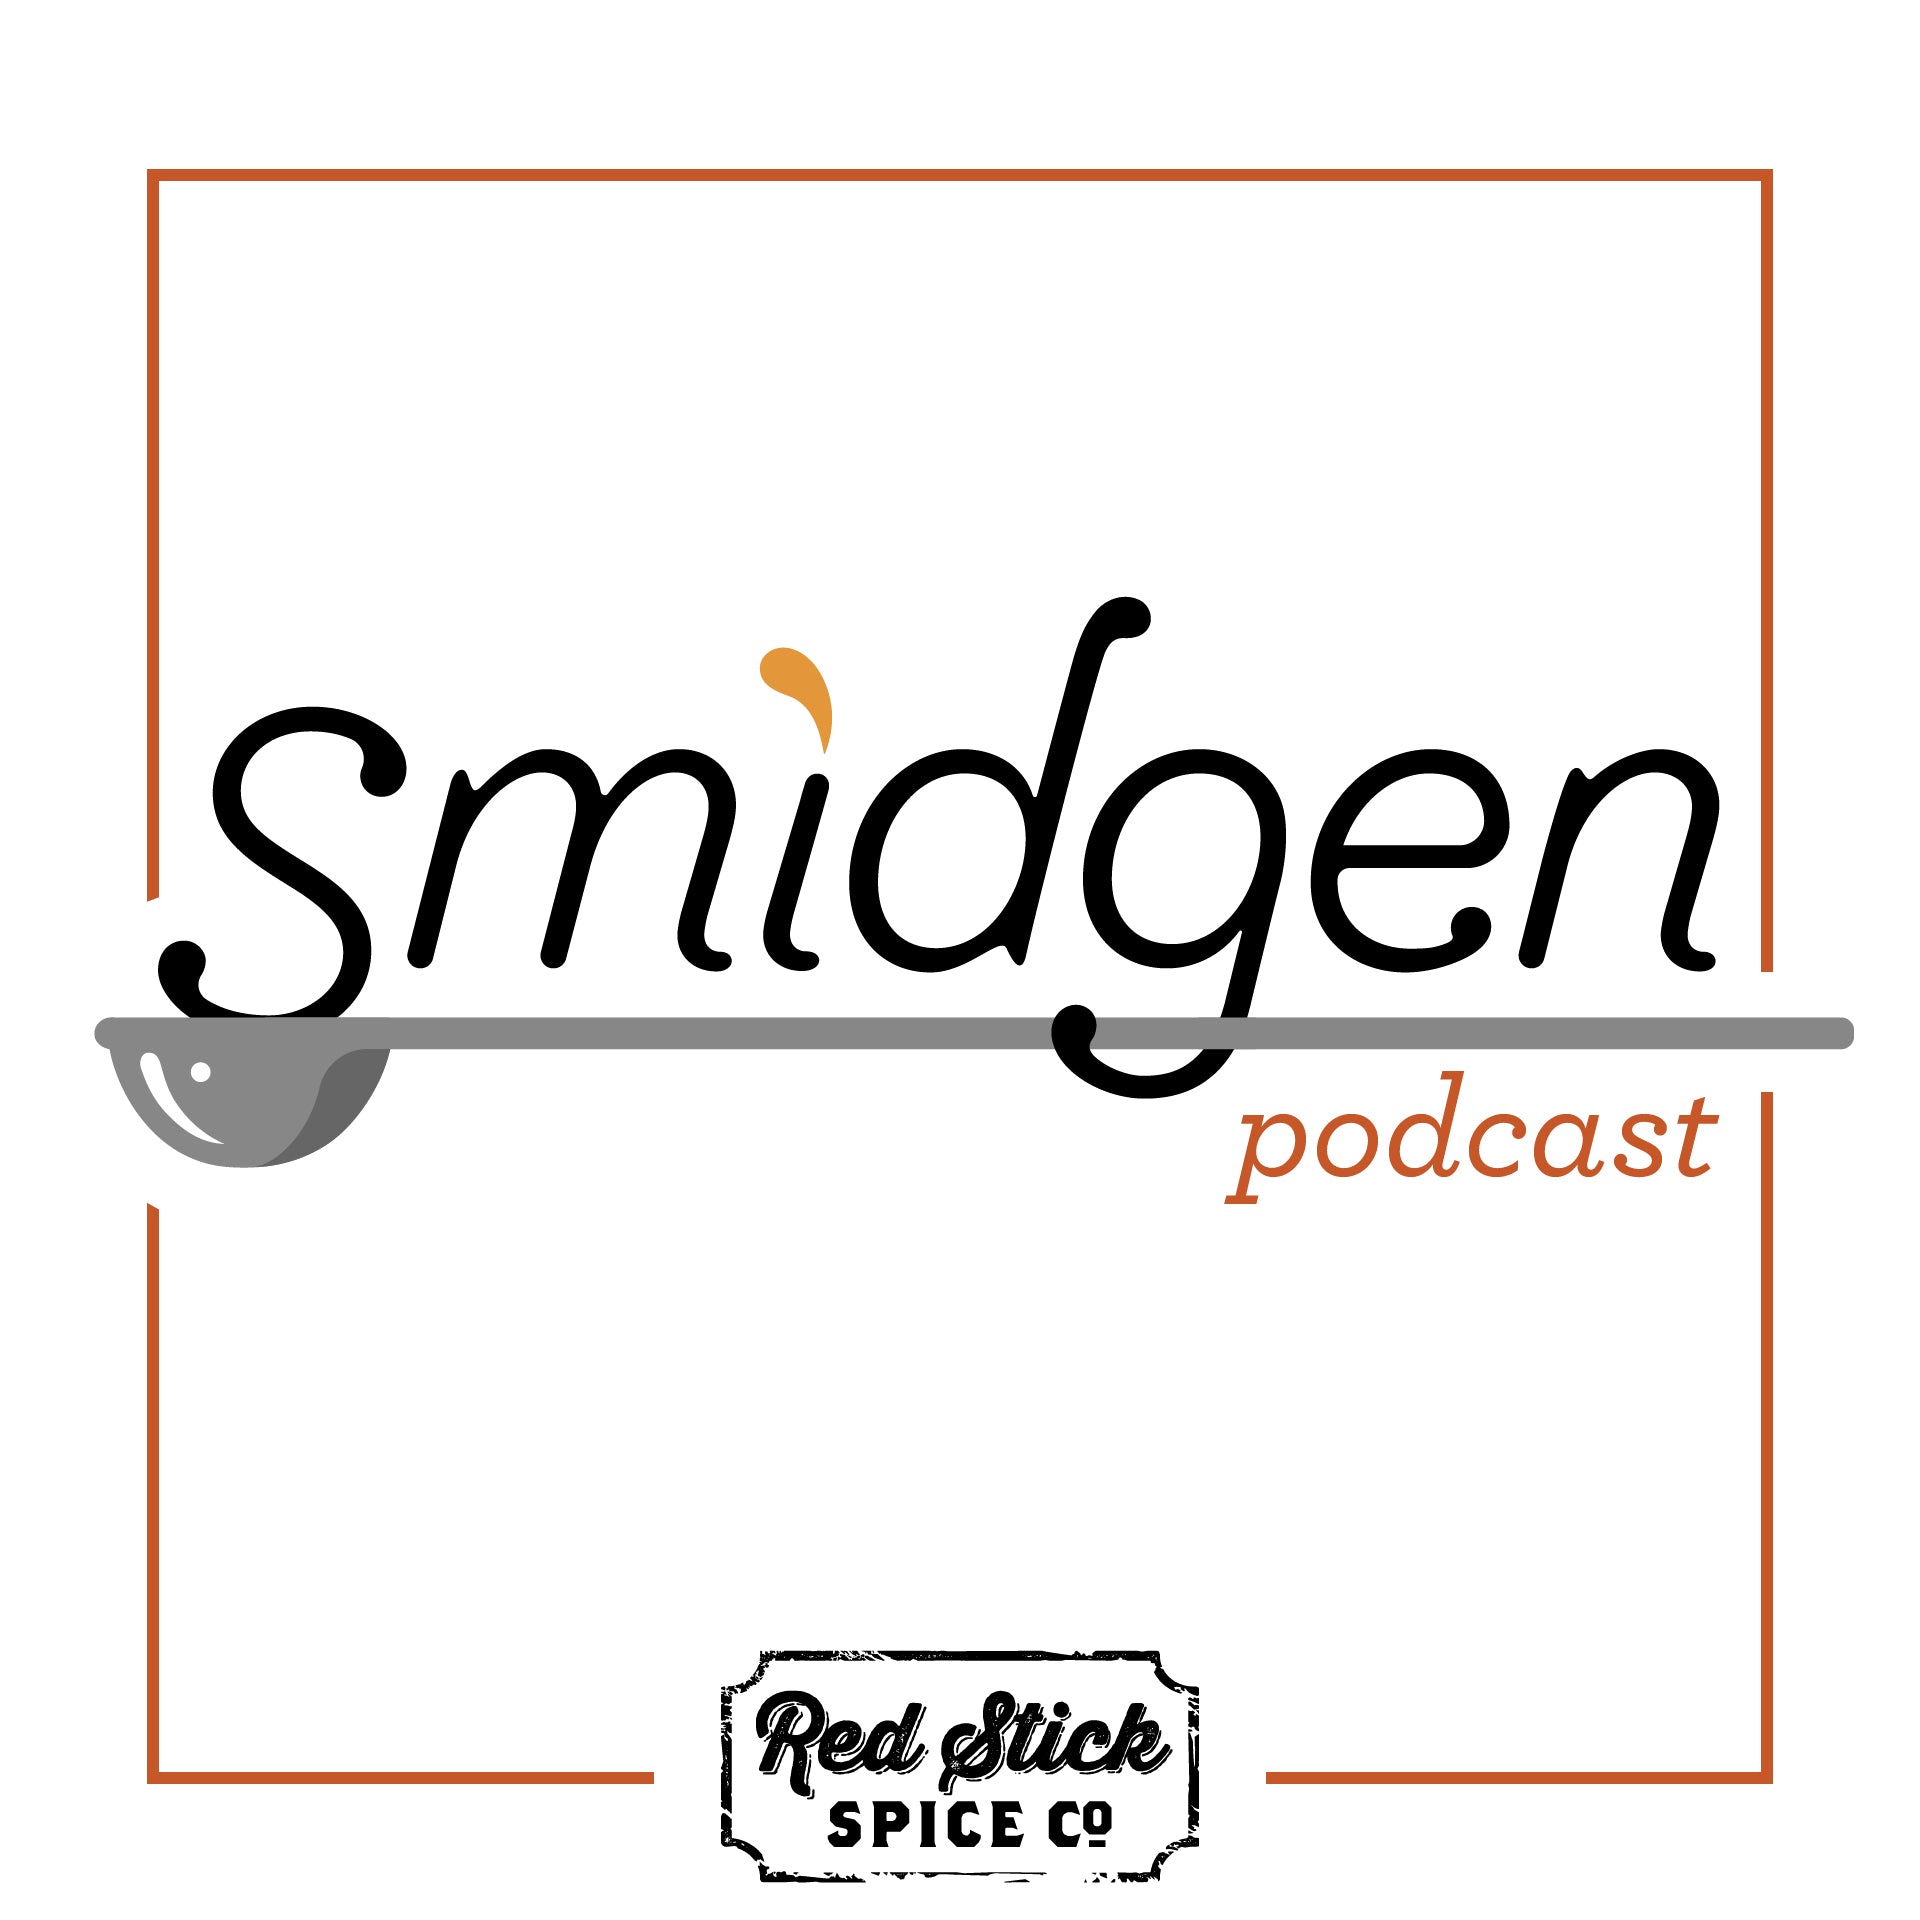 Smidgen-the Red Stick Spice Co Podcast-COMING SOON!